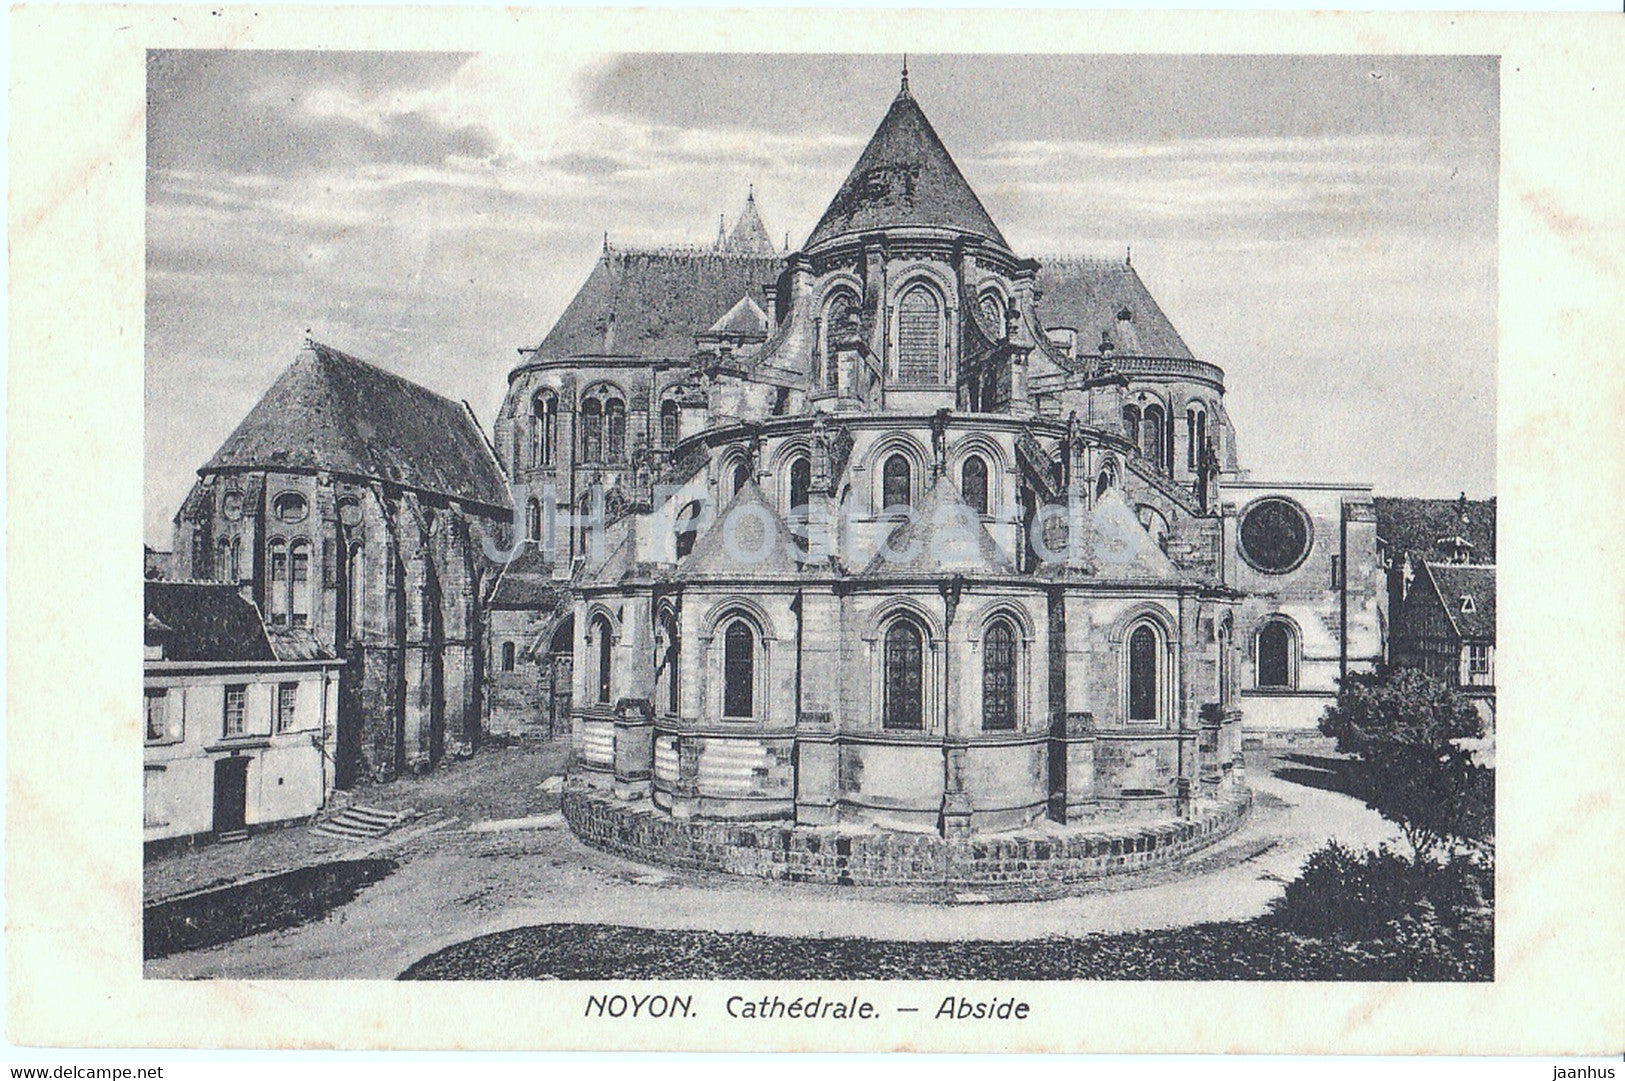 Noyon - Cathedrale - Abside - 18 Res Division - Feldpost - old postcard - 1915 - France - used - JH Postcards